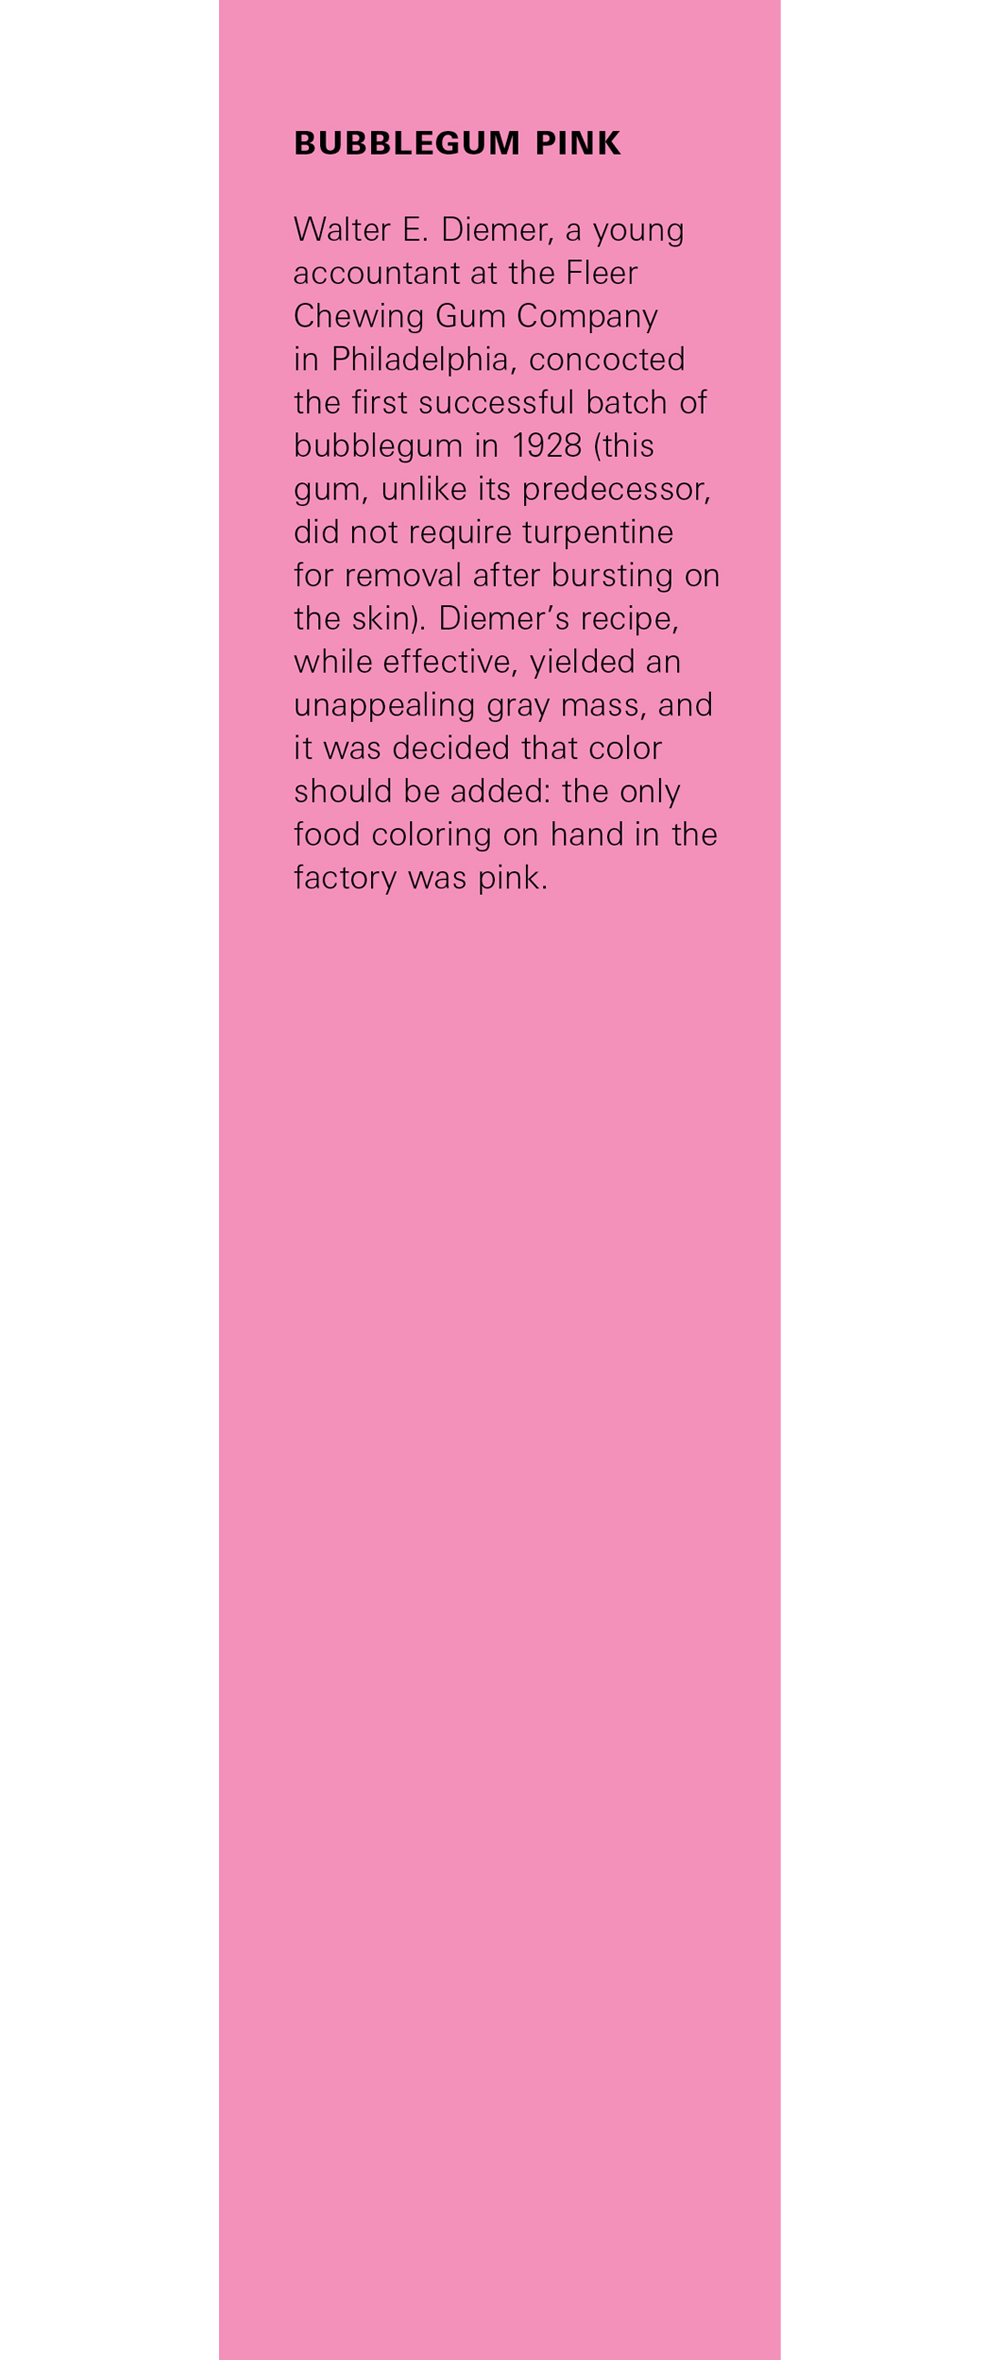 This issue’s bookmark, which is printed on a pink background and bears text that reads: “The birth of bubblegum pink. Walter E. Diemer, a young accountant at the Fleer Chewing Gum Company in Philadelphia, concocted the first successful batch of bubblegum in nineteen twenty-eight (this gum, unlike its predecessor, did not require turpentine for removal after bursting on the skin). Diemer’s recipe, while effective, yielded an unappealing gray mass, and it was decided that color should be added: the only food coloring on hand in the factory was pink.”